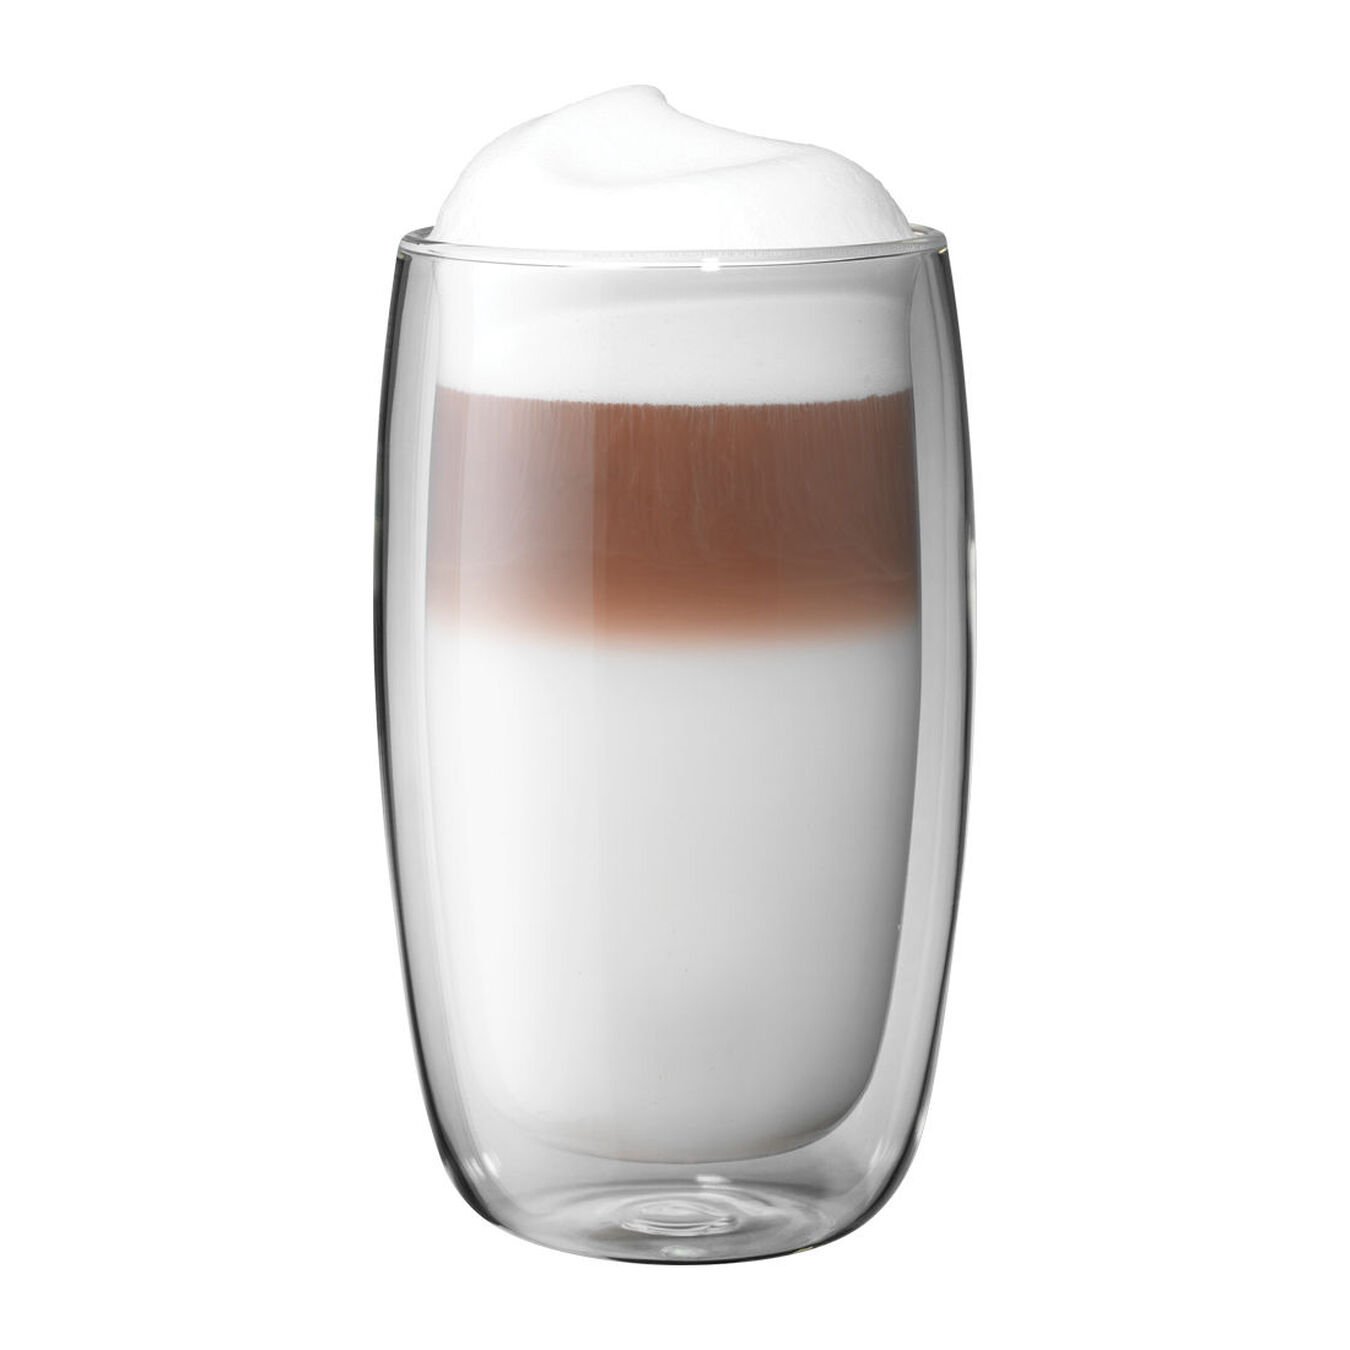 latte glass with creamy beverage on white background